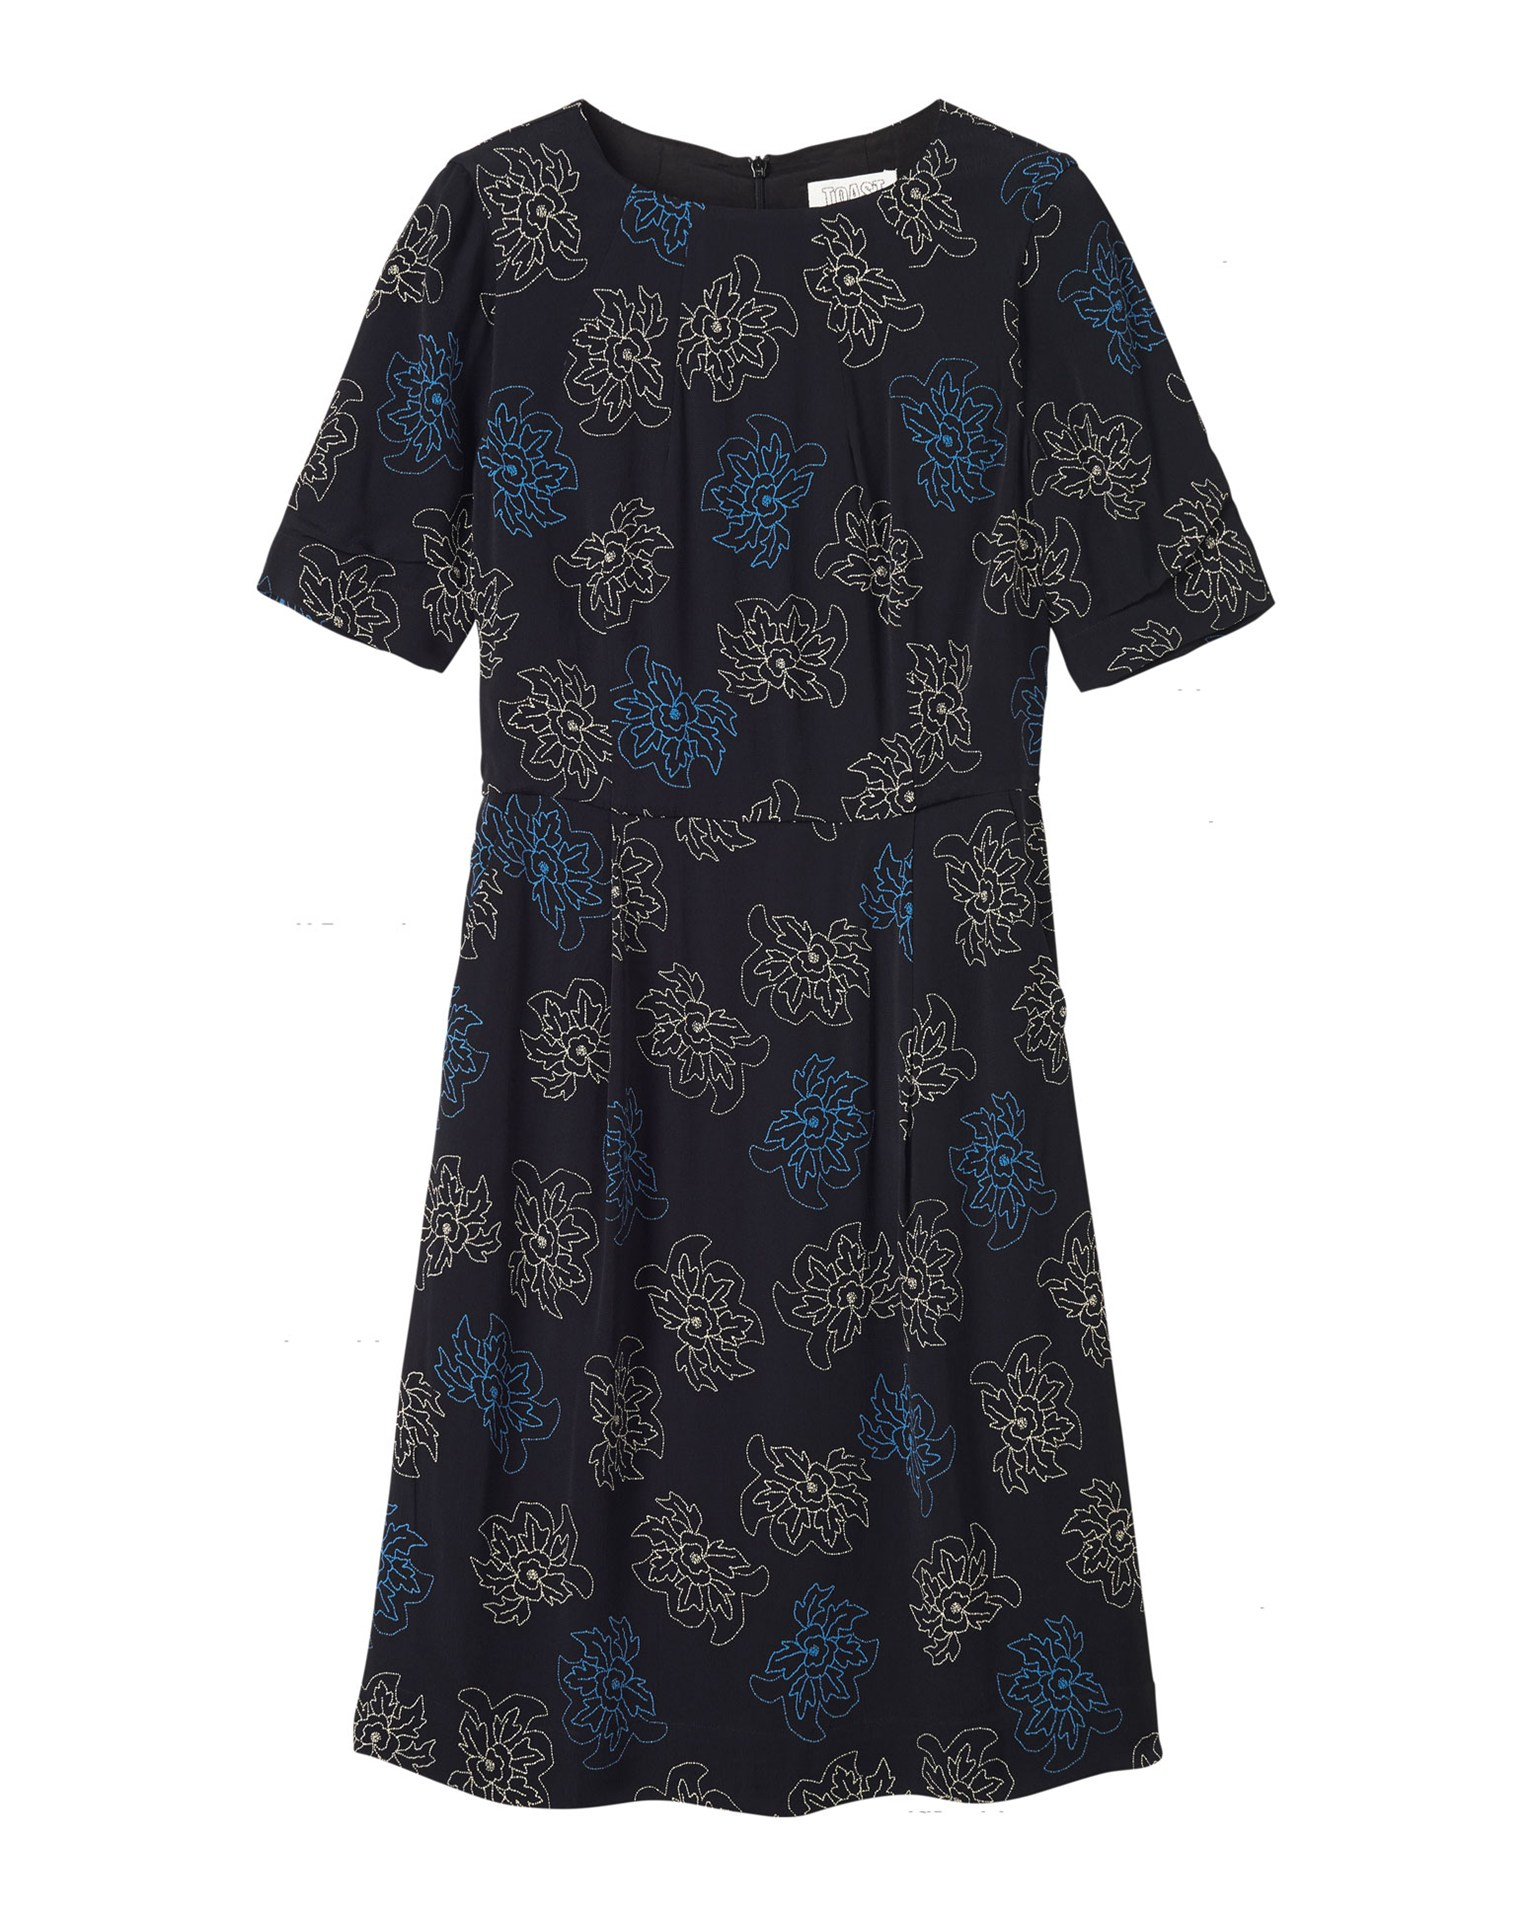 Toast Dotted Floral Dress in Black | Lyst